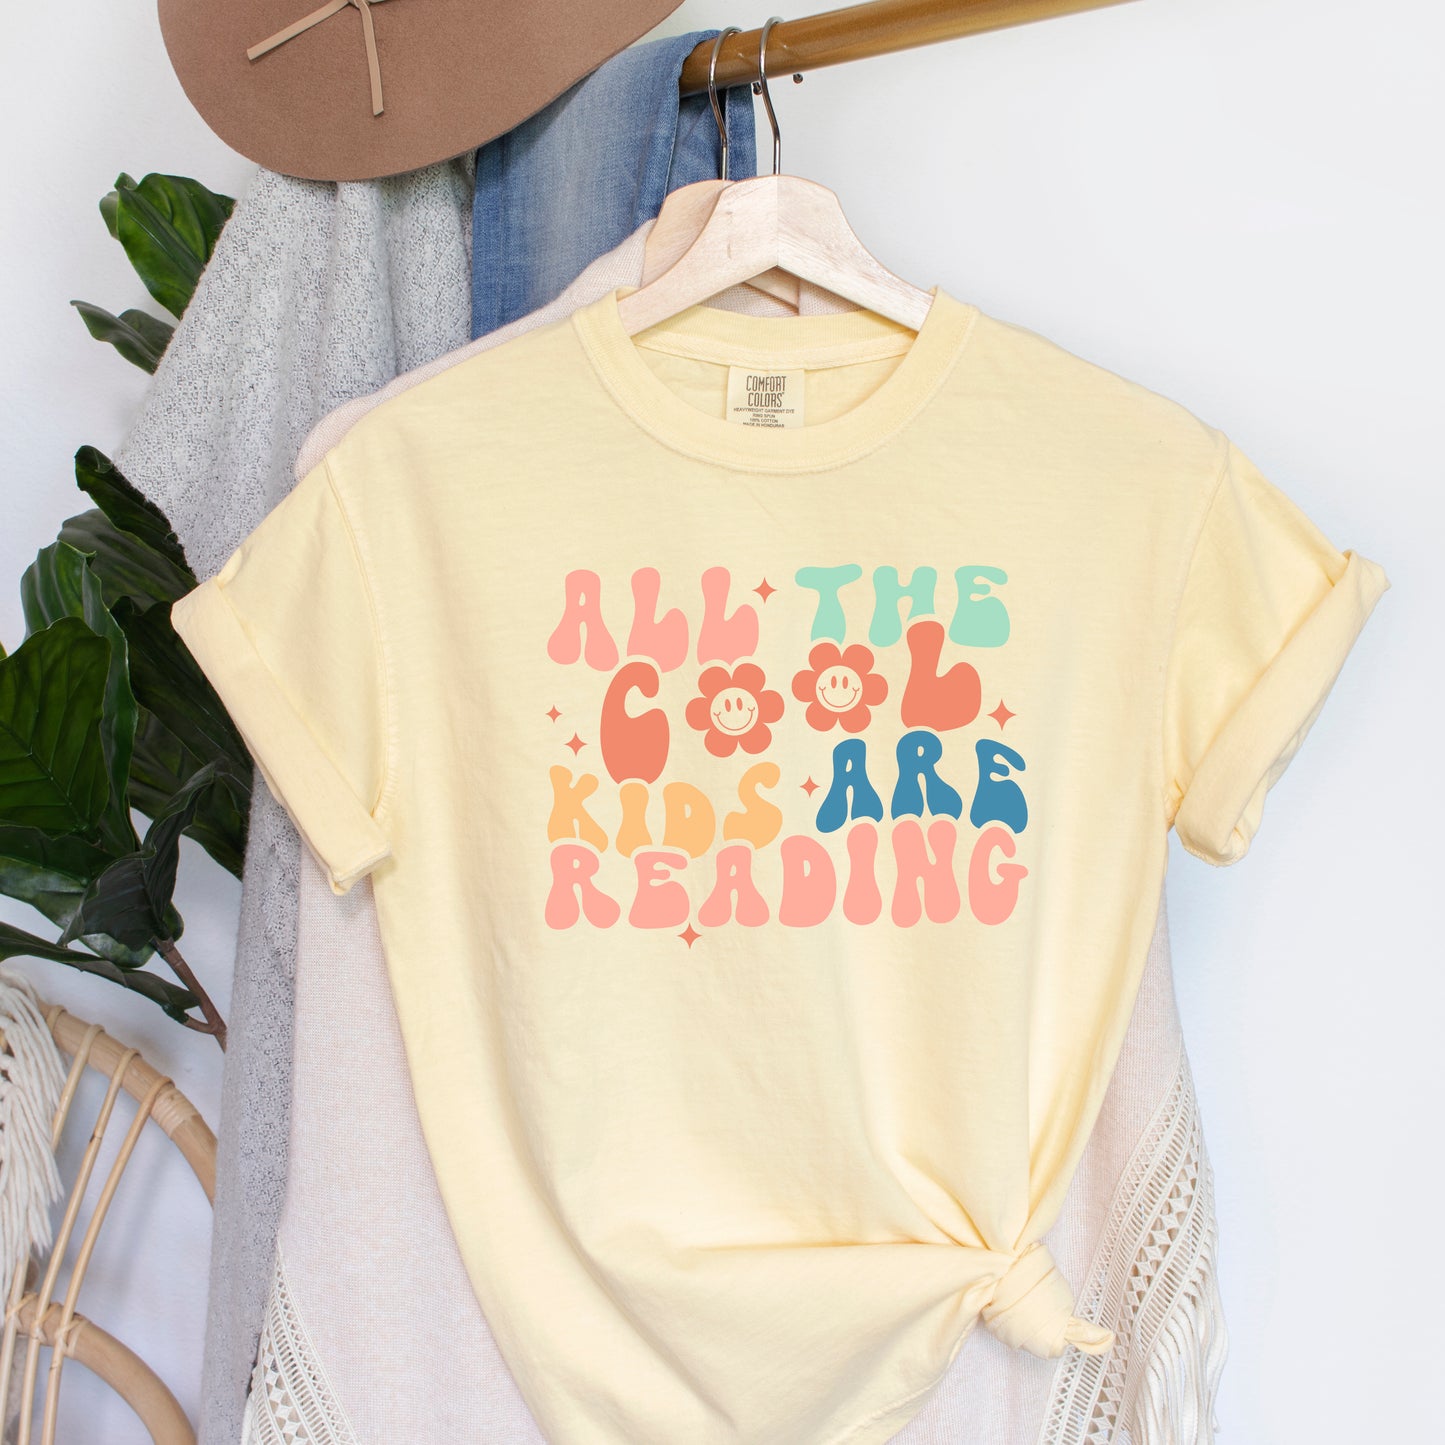 Cool Kids Are Reading Colorful | Garment Dyed Short Sleeve Tee